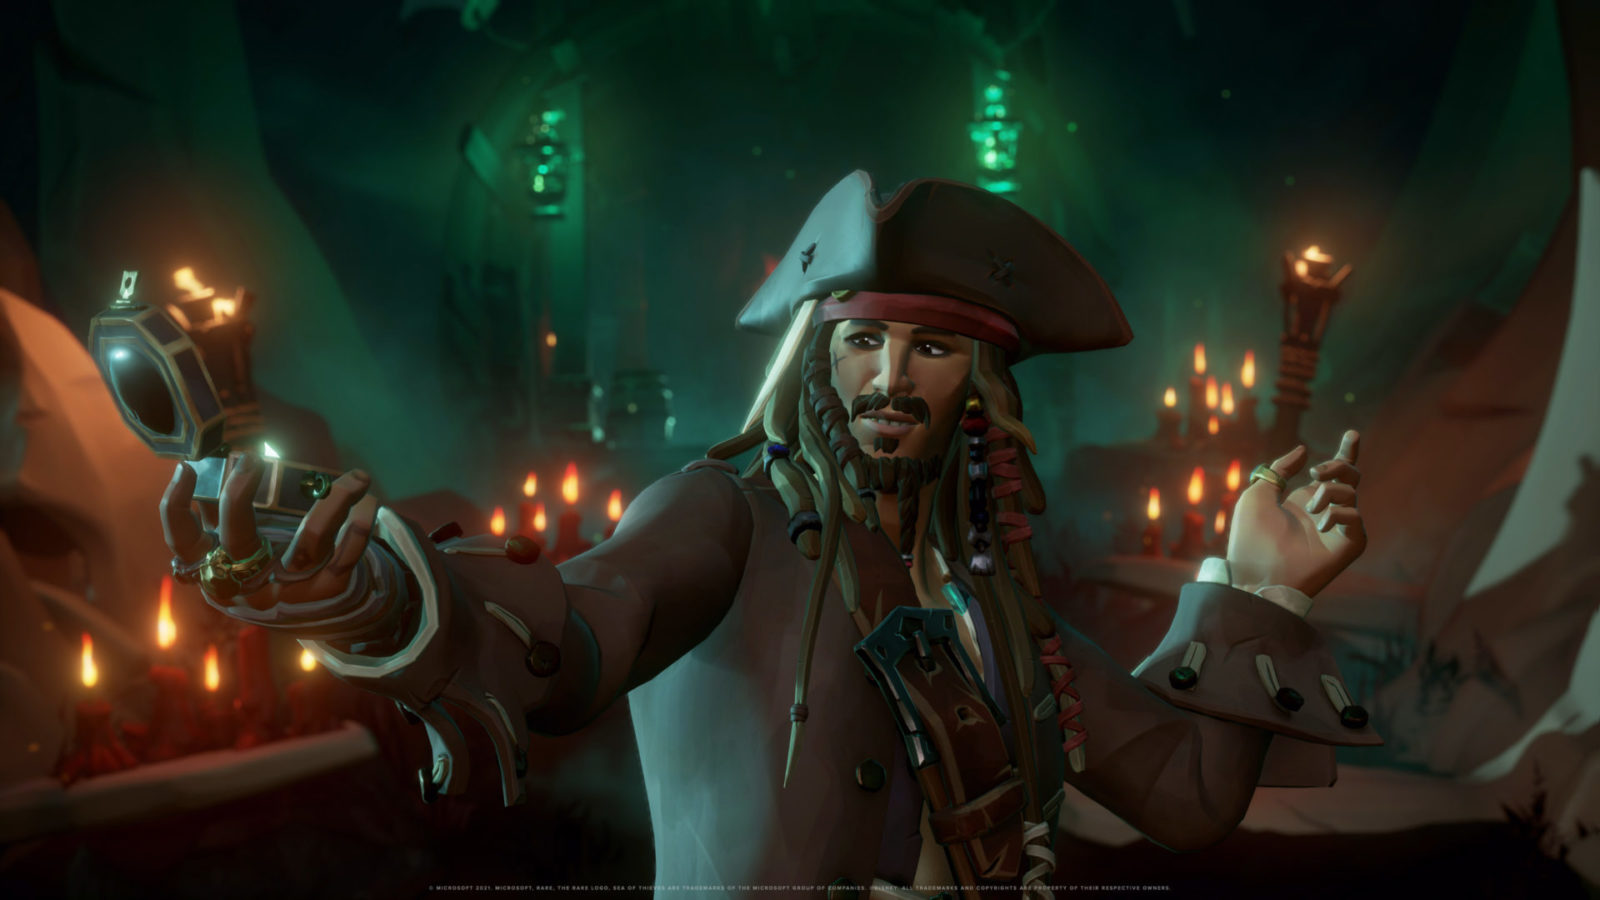 Sea of Thieves: A new trailer with Jack Sparrow